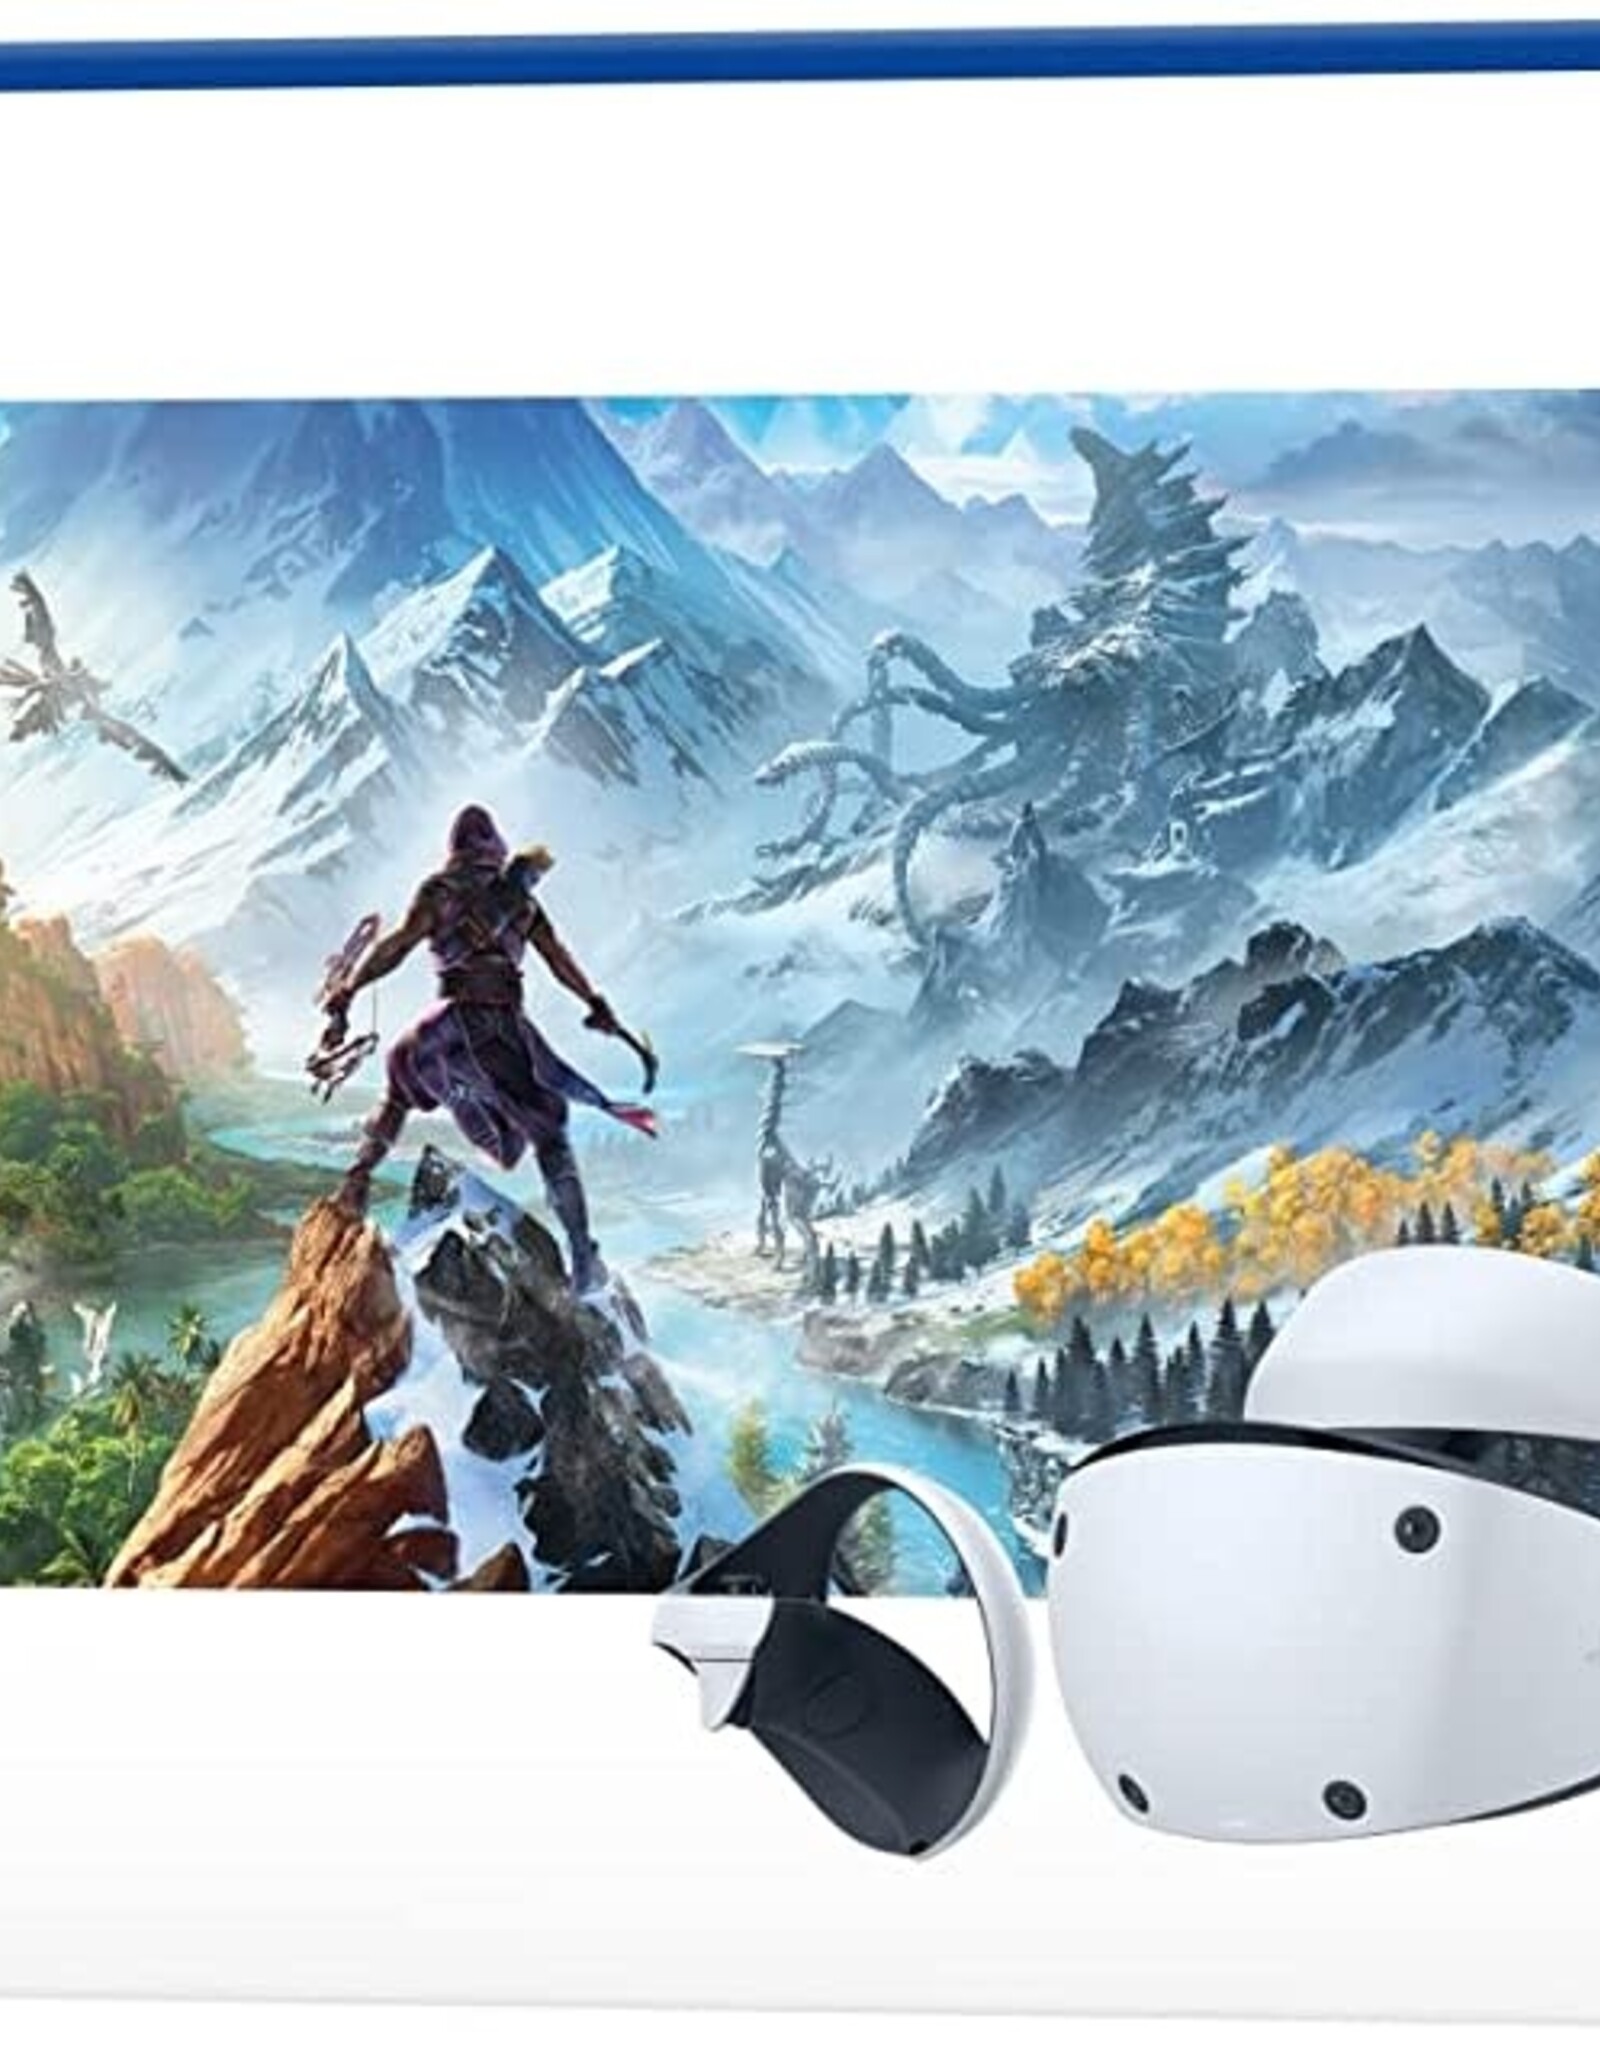 PlayStation VR2 Horizon Call of the Mountain with Accessories